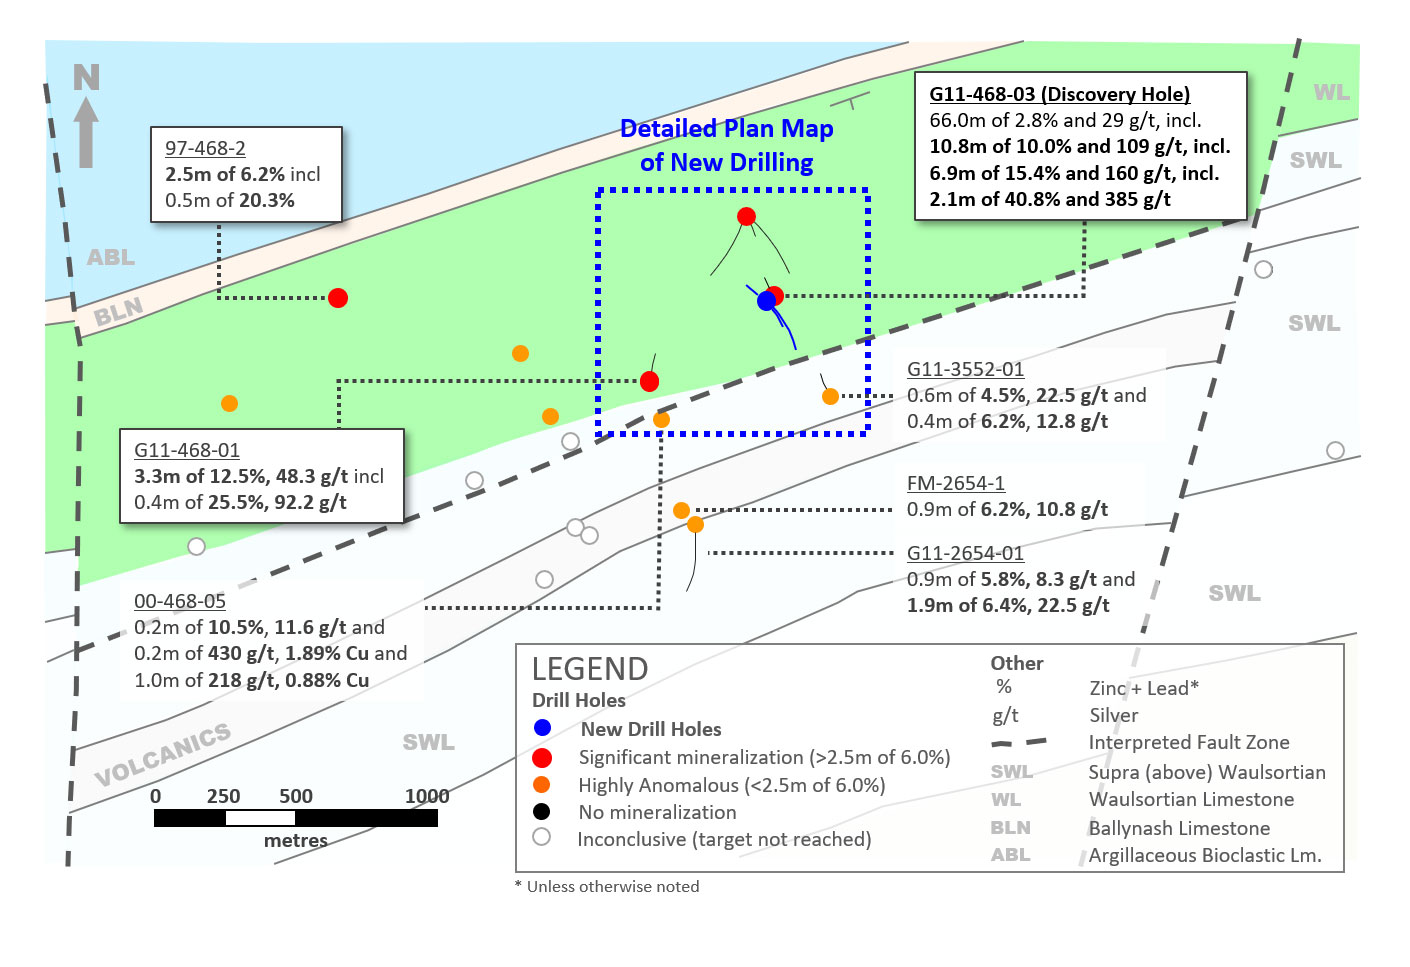 Exhibit 1. Plan Map of New Drilling at Ballywire Discovery, PG West Project (100% interest), Ireland